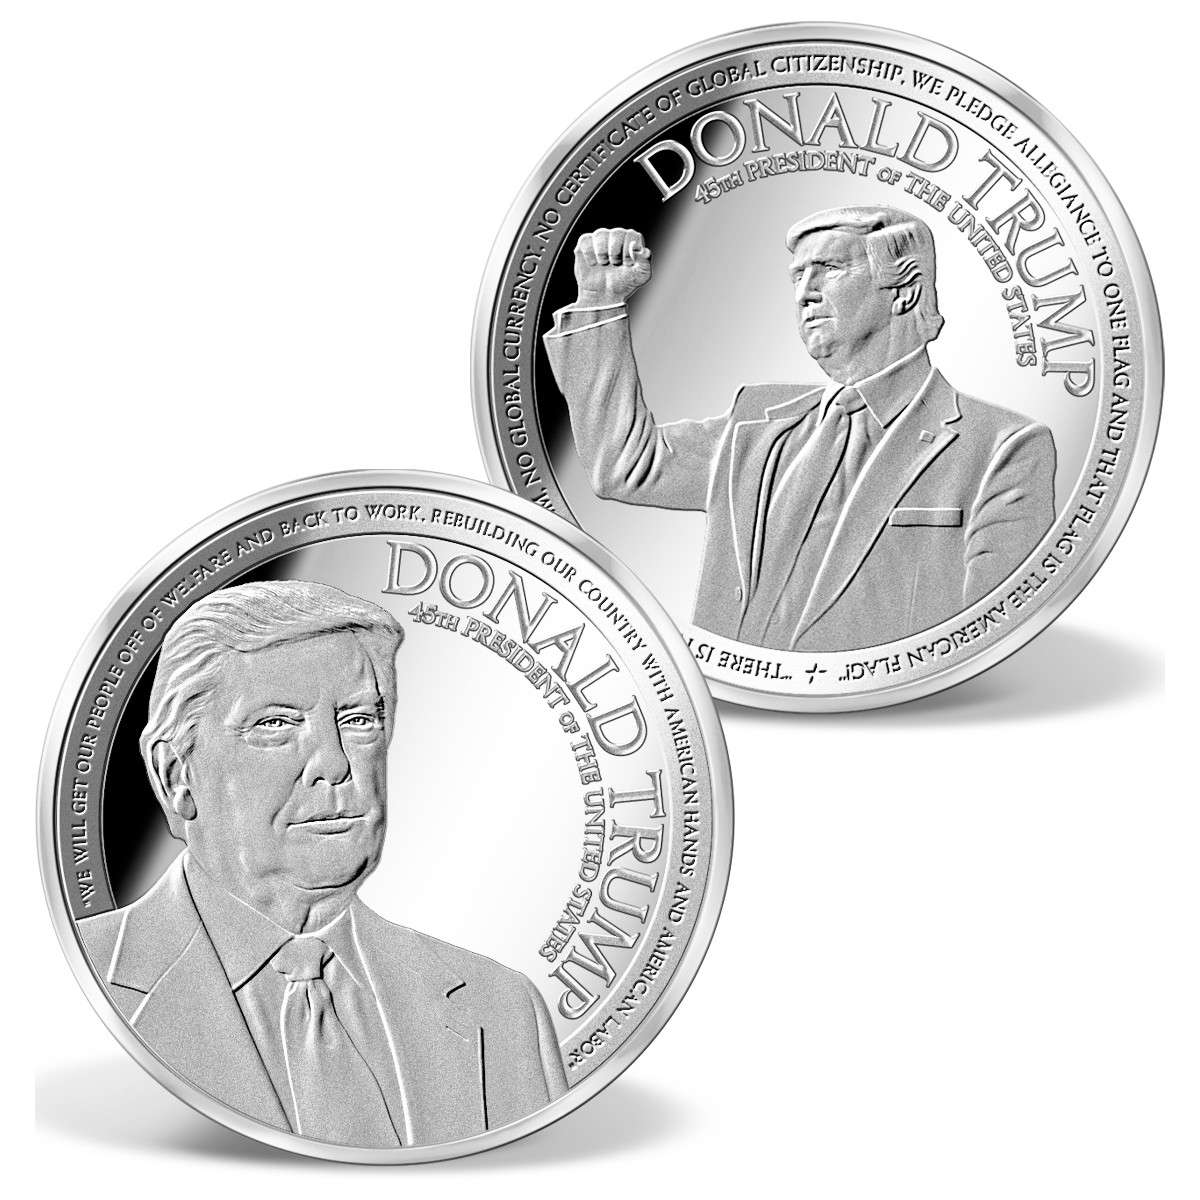 Complete Speeches of Donald Trump Coin Set | Silver-Plated | Silver ...